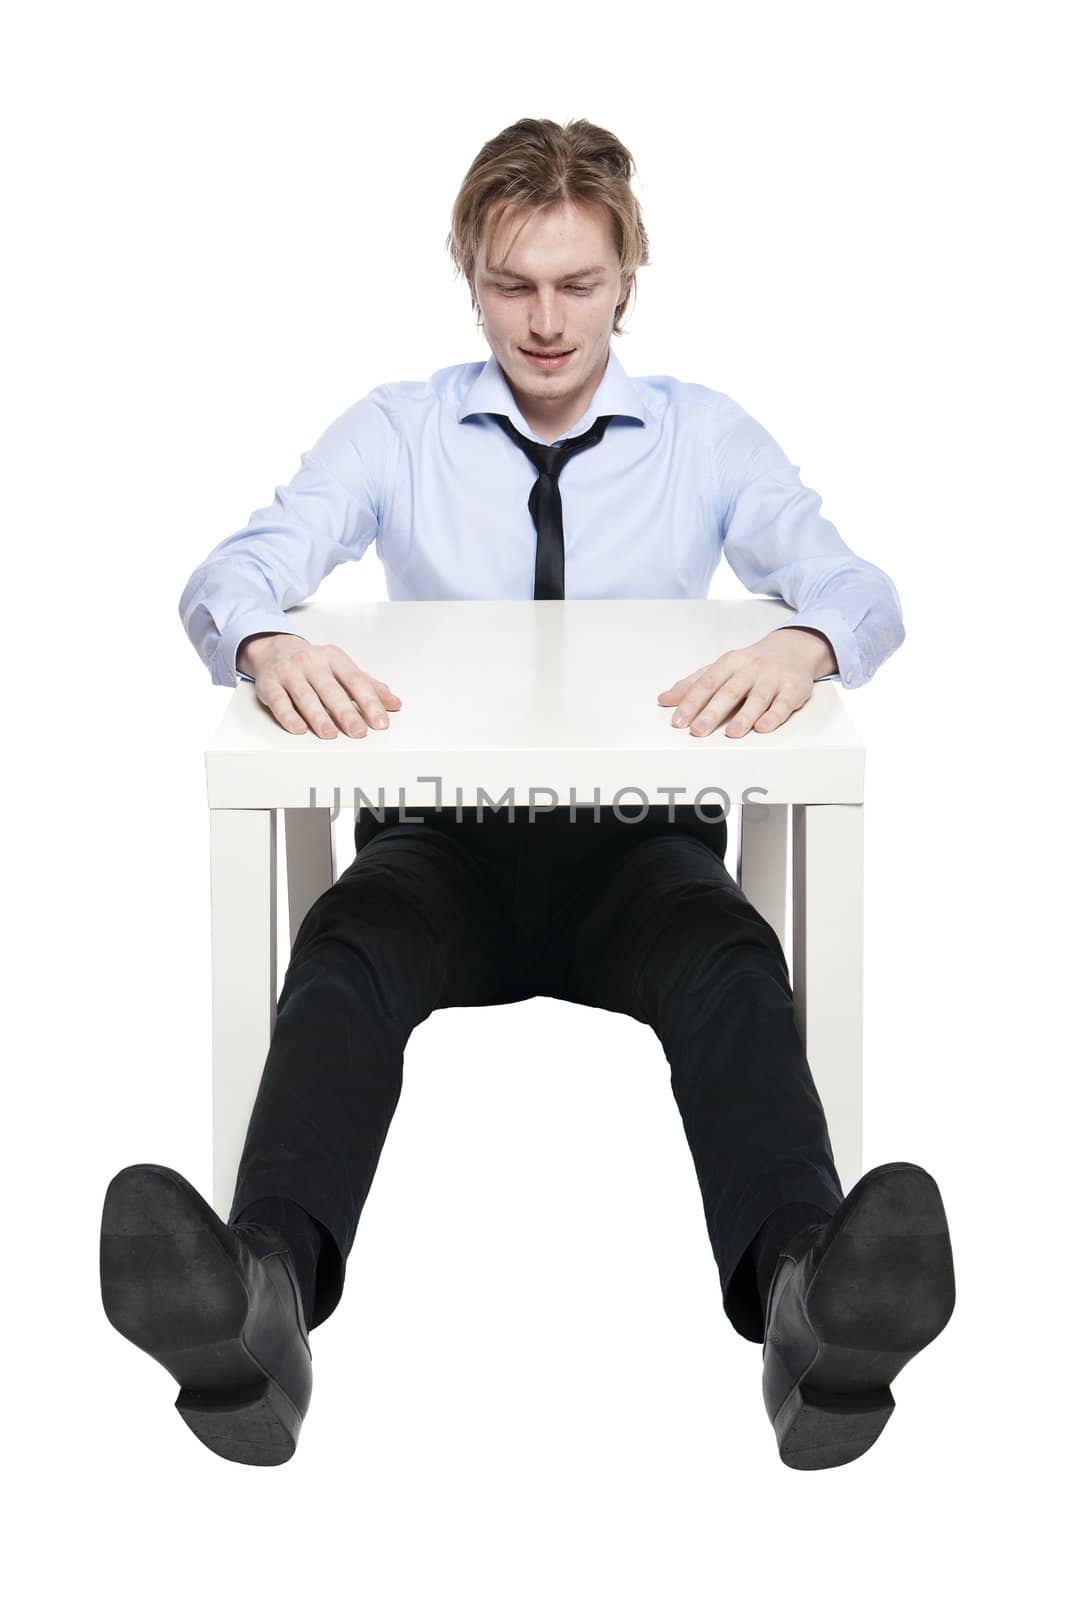 Young businessman, office worker or student sitting at funny small table. Studio photo, isolated.